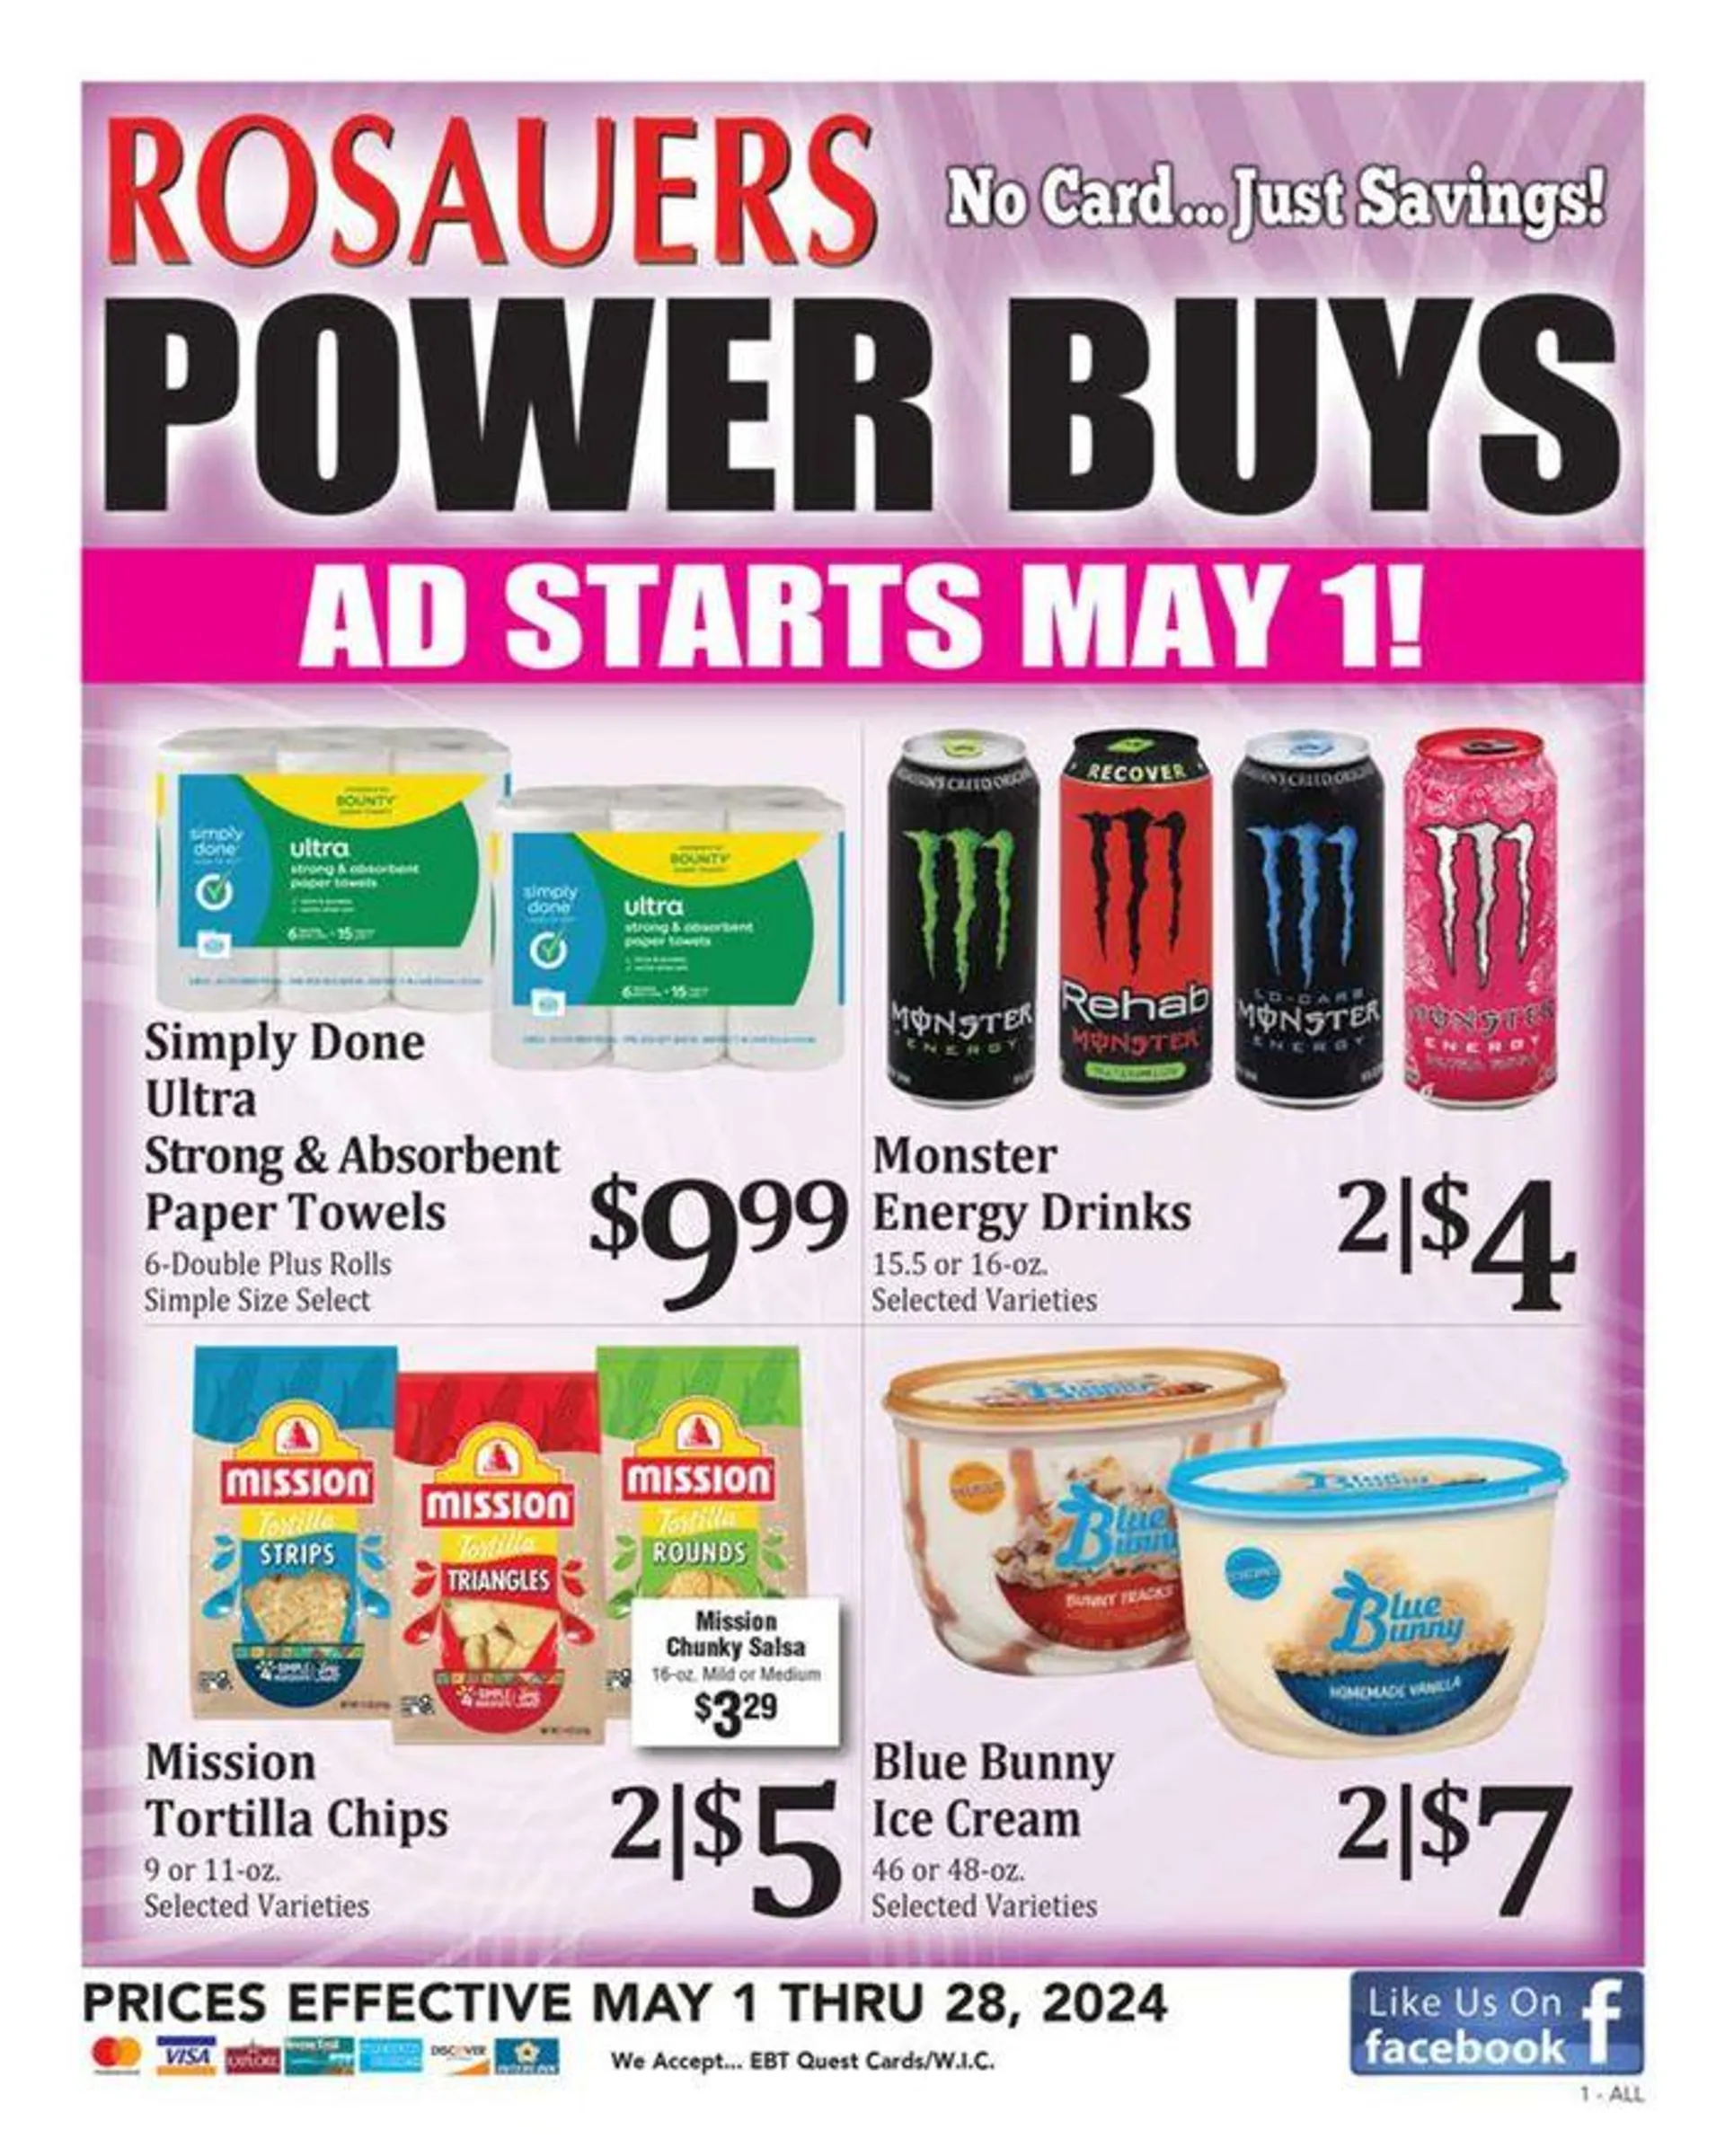 Monthly Power Buys - 1